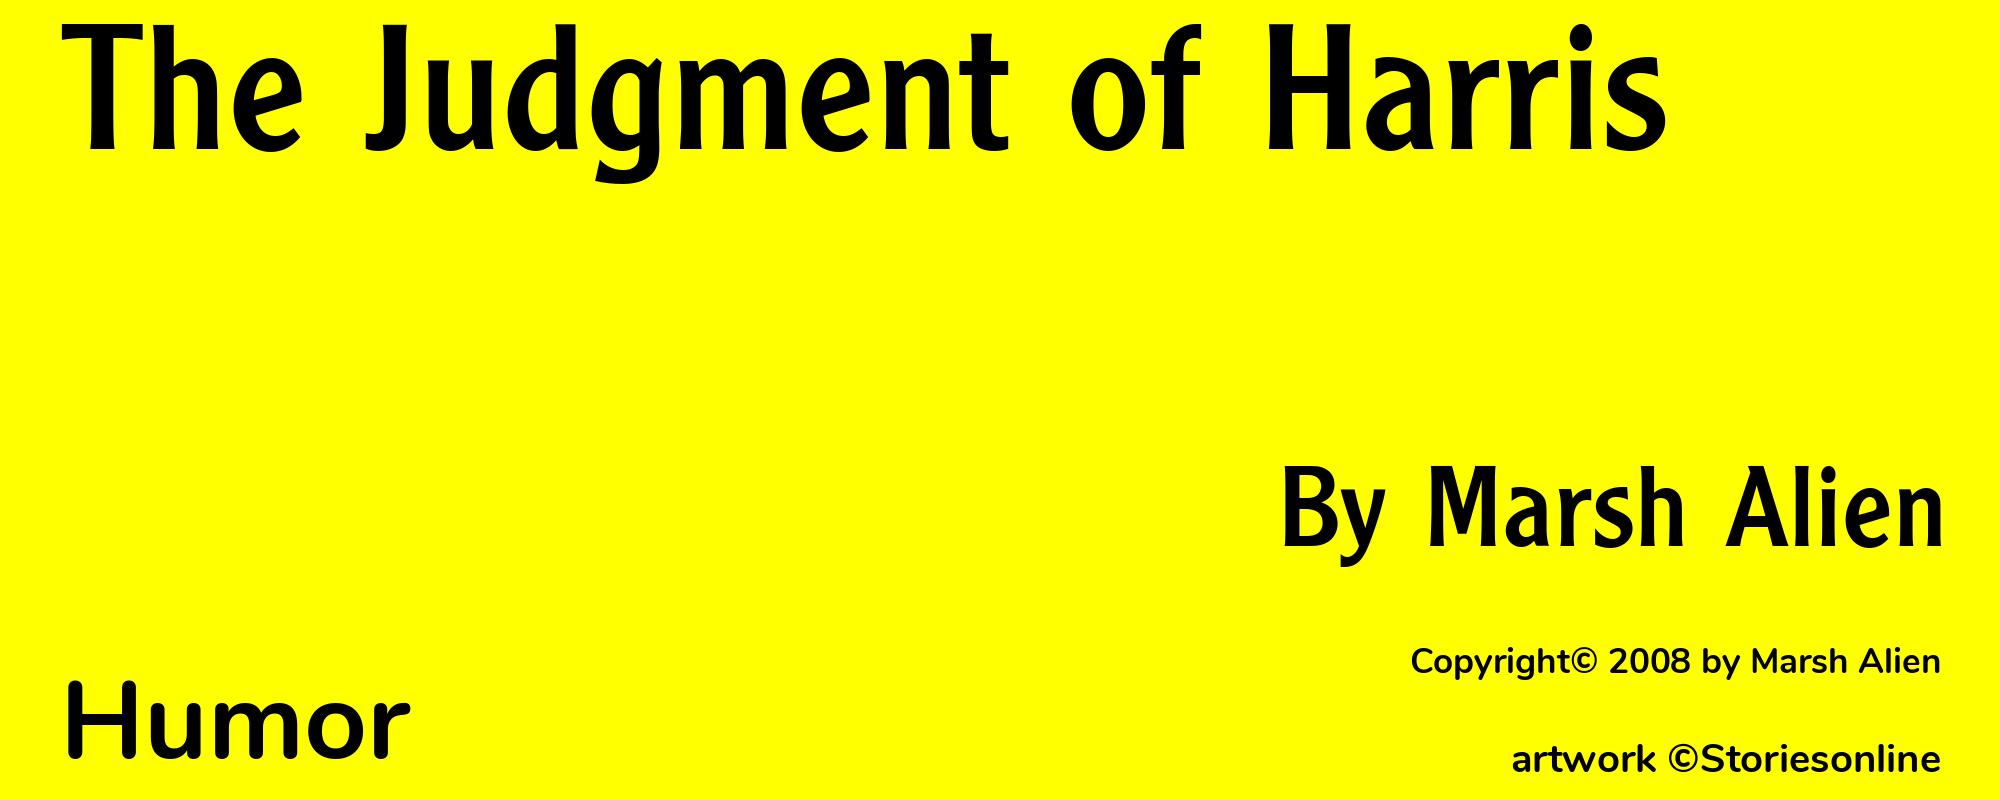 The Judgment of Harris - Cover